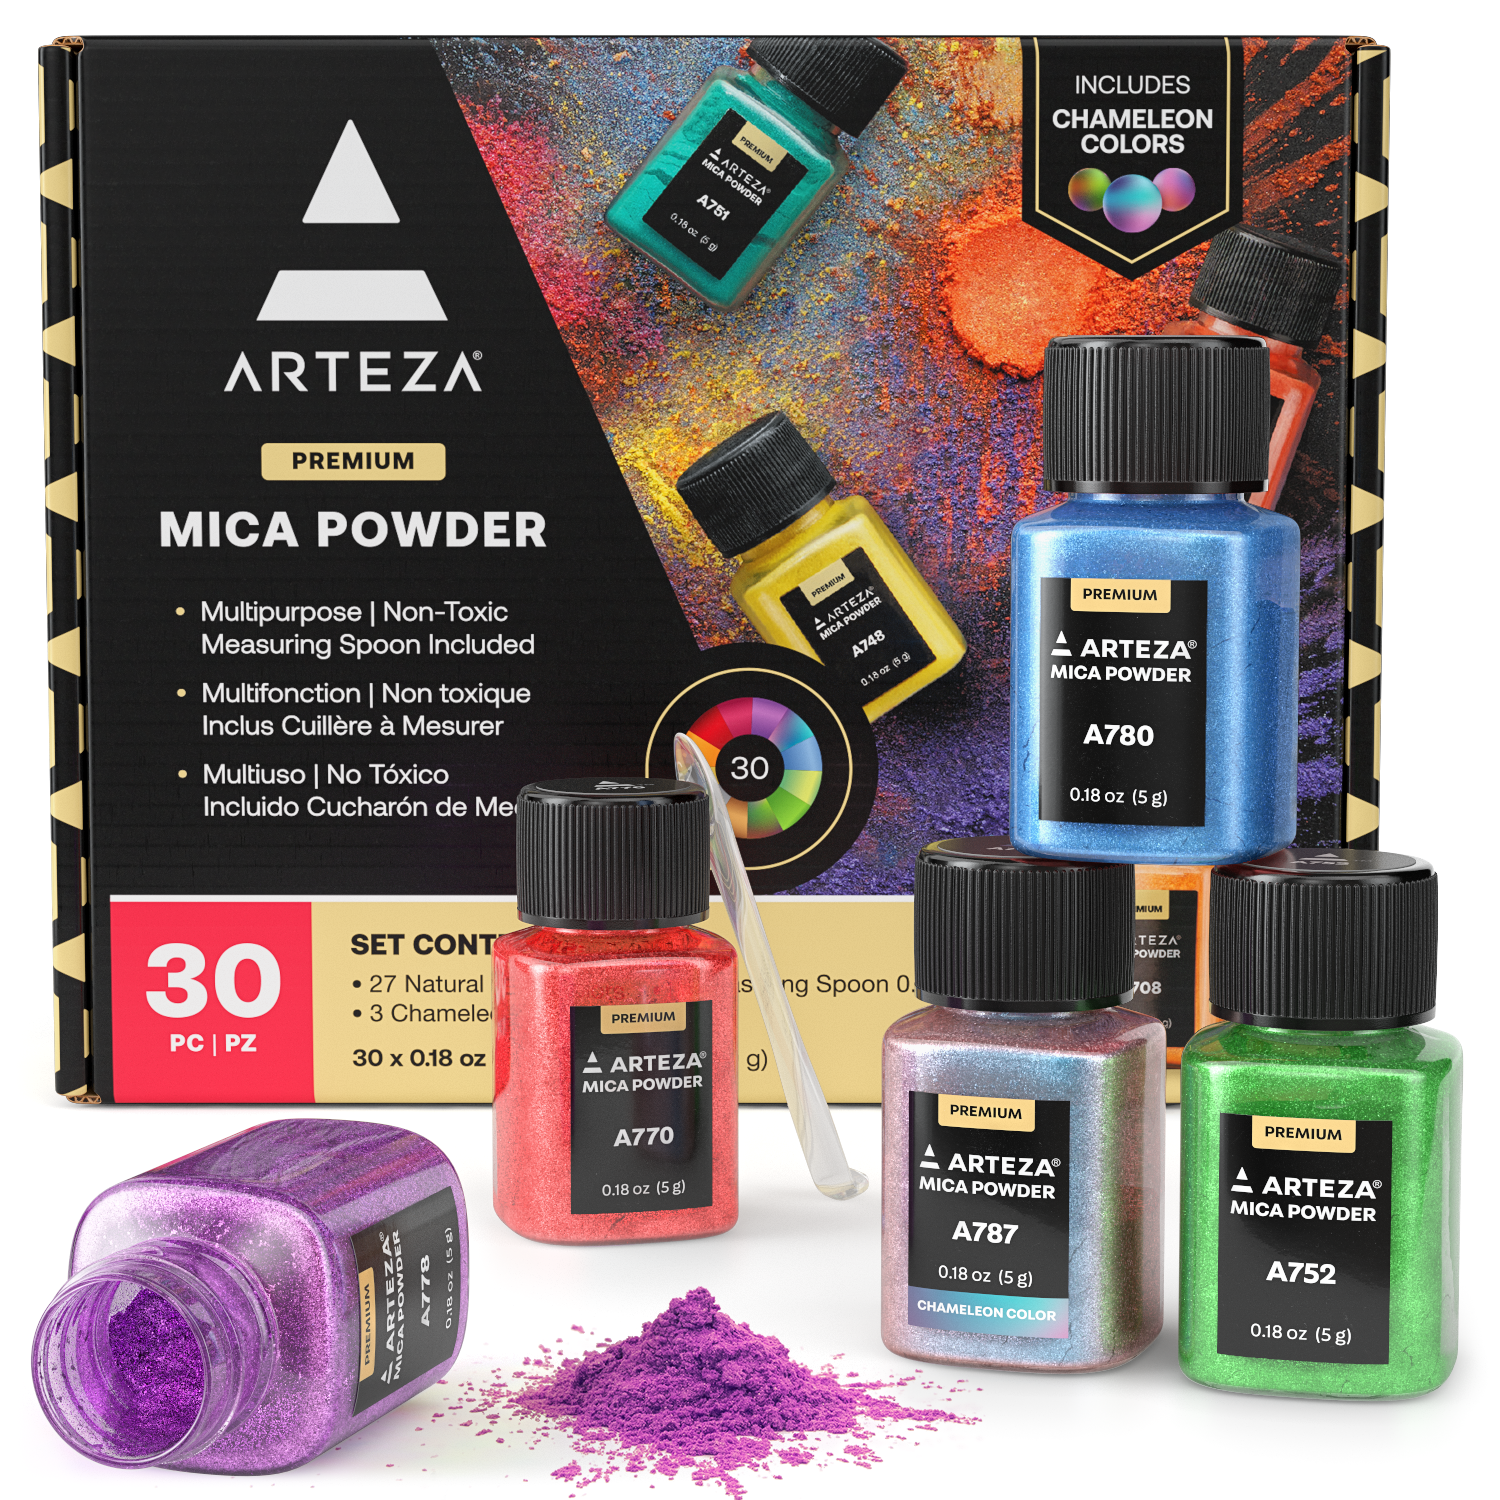 How to use mica powder - Arteza mica powders product review 